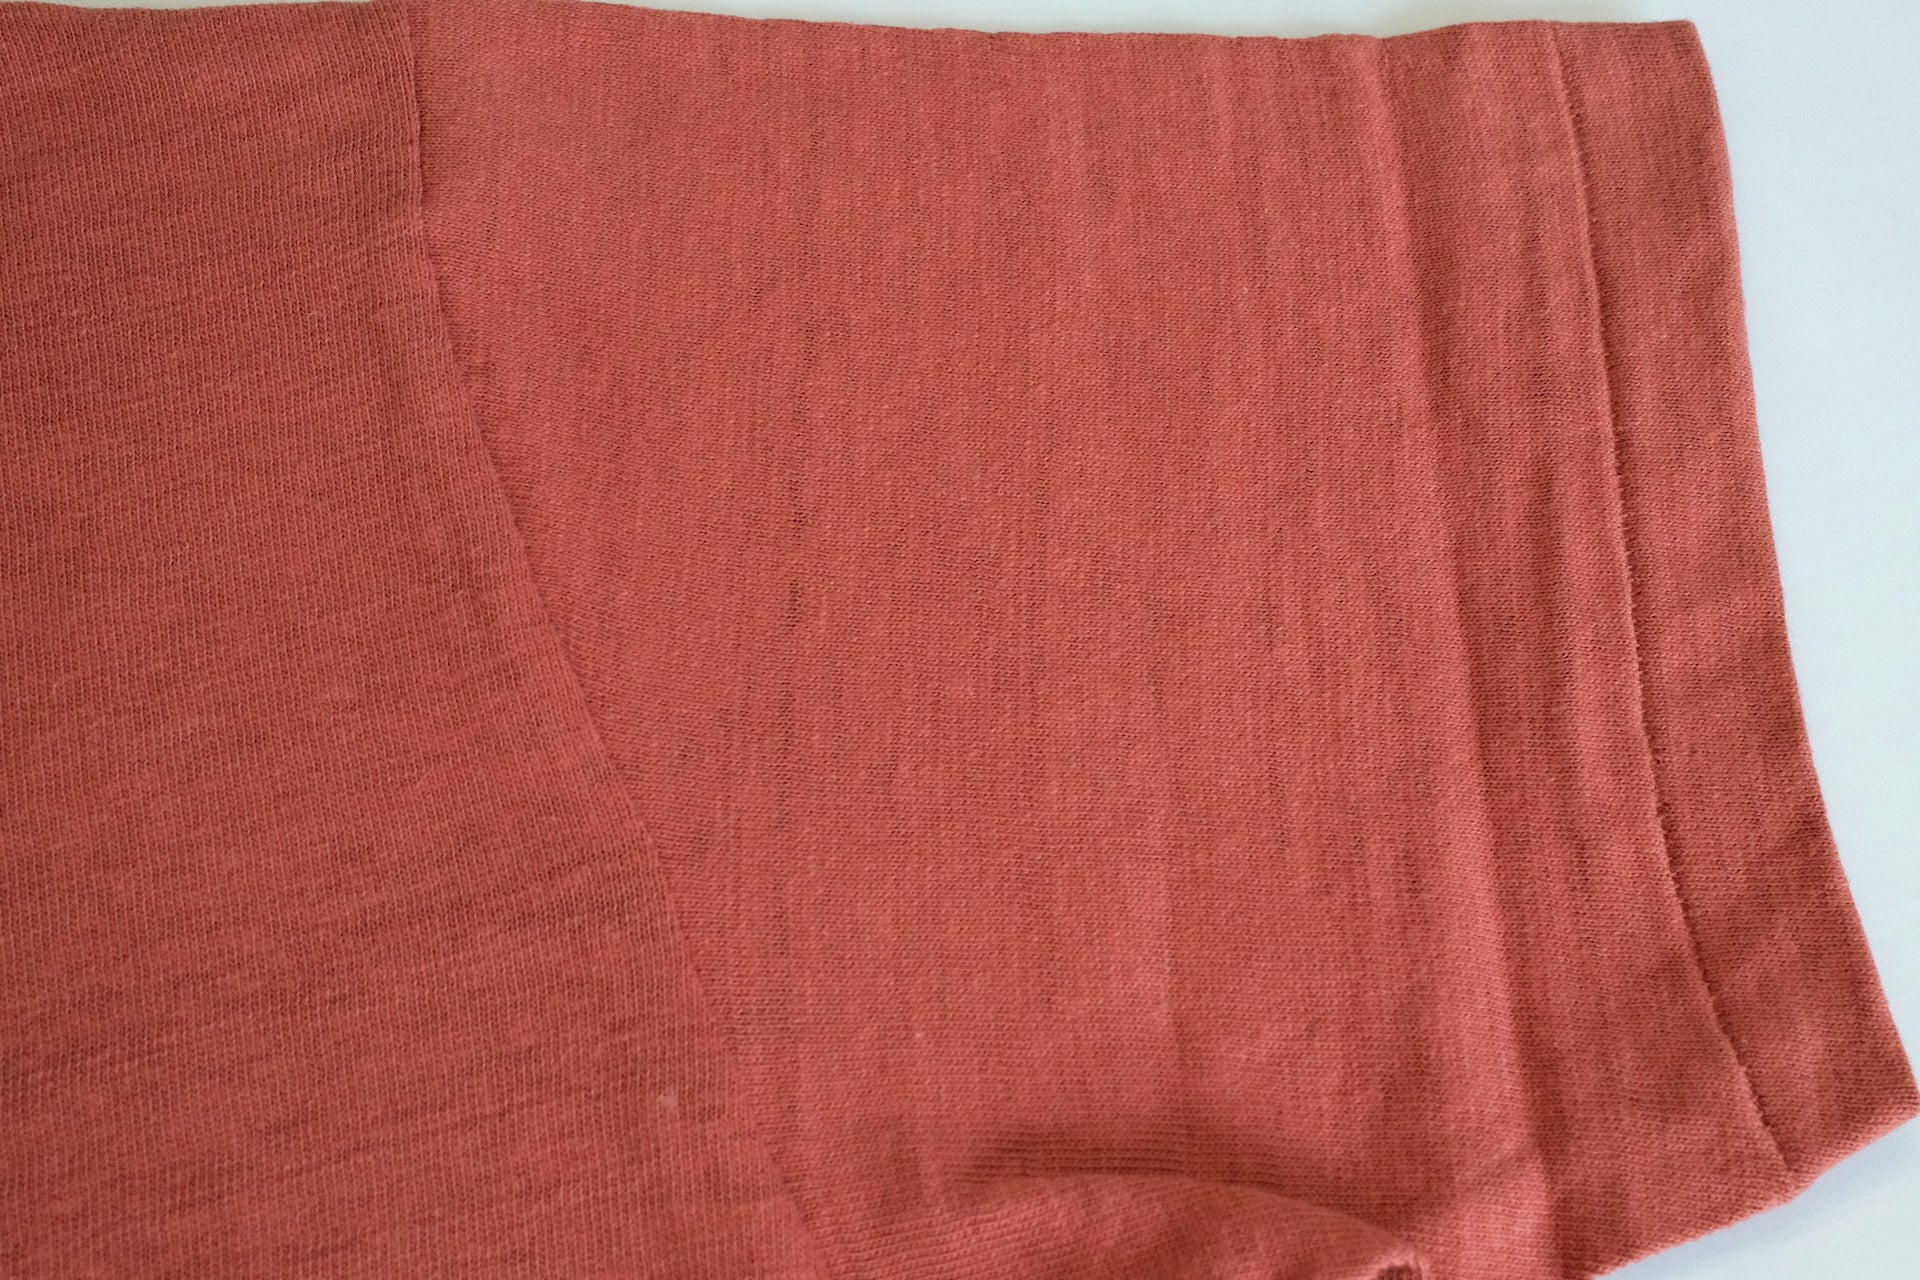 Warehouse "Patchogue" 'Bamboo Textured' Tee (Salmon)